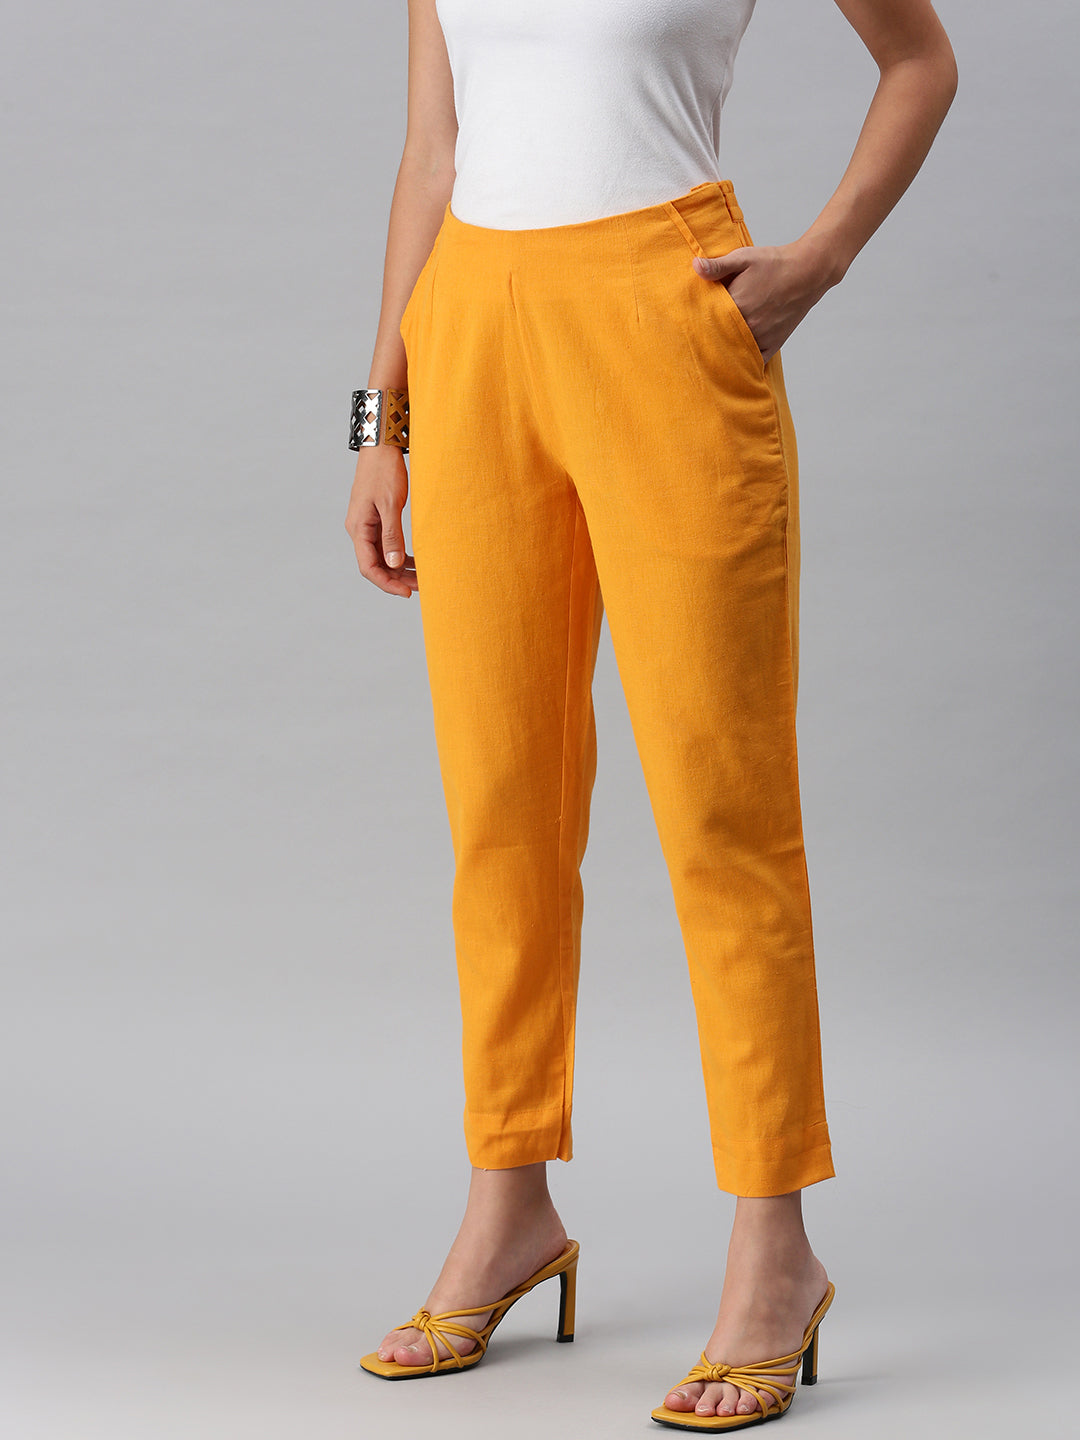 Classic Trouser Office Big Size Pant - Yellow - Wholesale Womens Clothing  Vendors For Boutiques